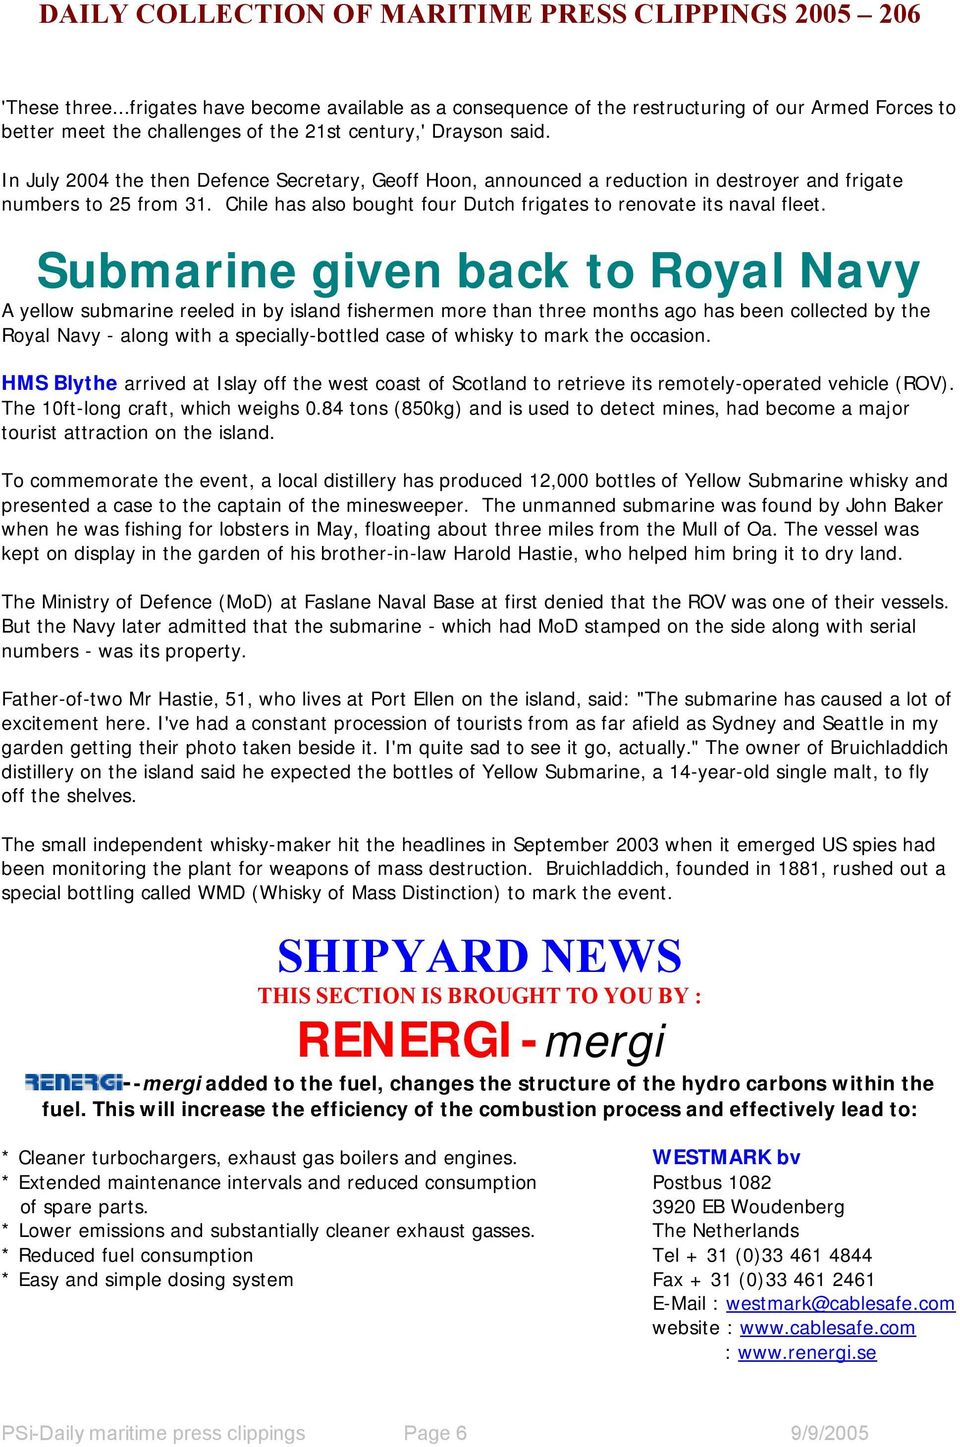 Submarine given back to Royal Navy A yellow submarine reeled in by island fishermen more than three months ago has been collected by the Royal Navy - along with a specially-bottled case of whisky to